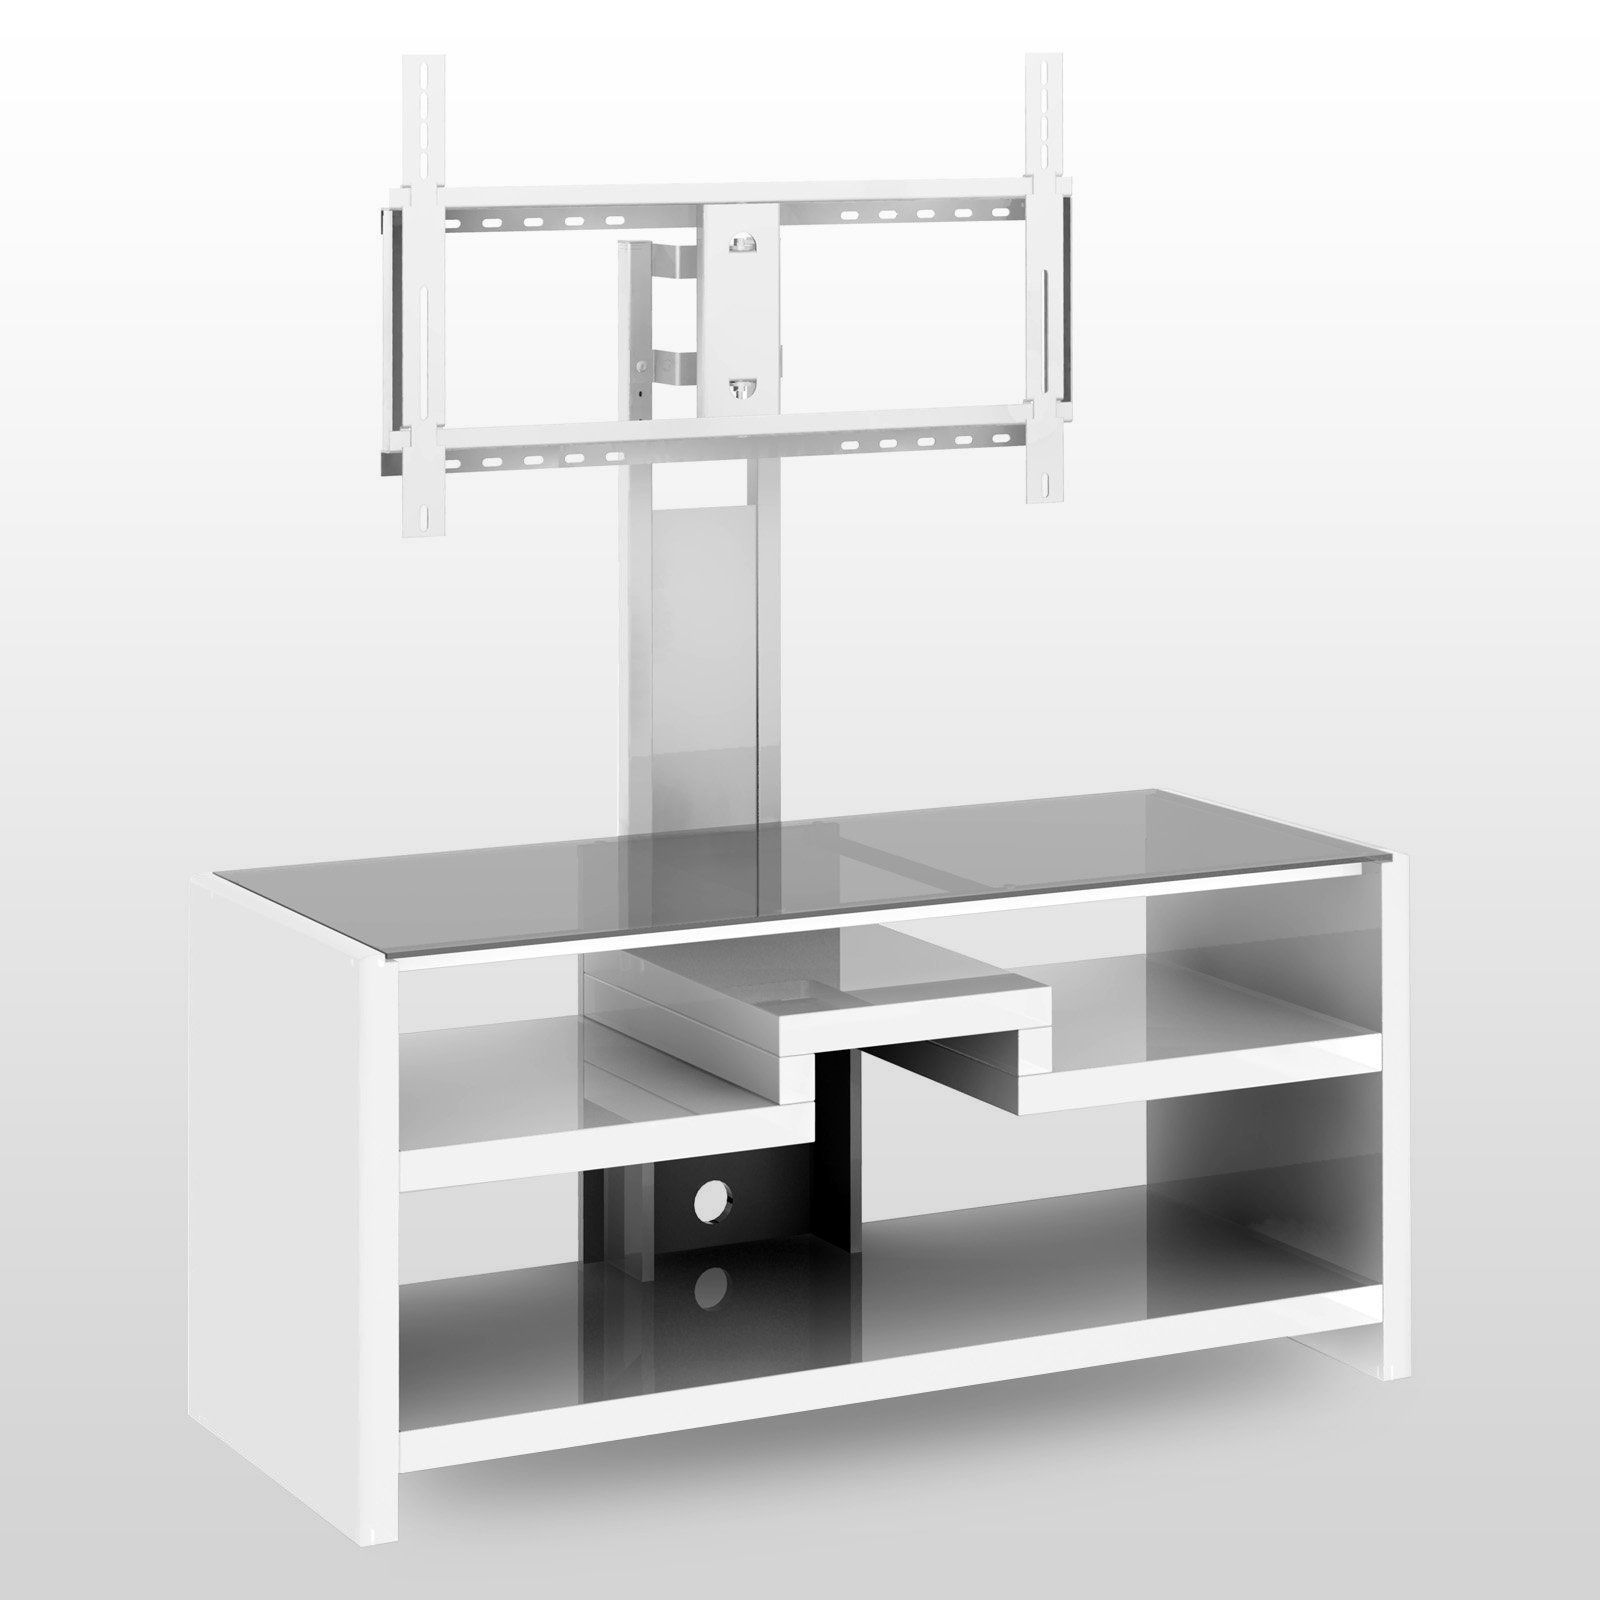 Cool Flat Screen Tv Stands With Mount – Homesfeed Intended For Contemporary Tv Stands For Flat Screens (View 6 of 15)